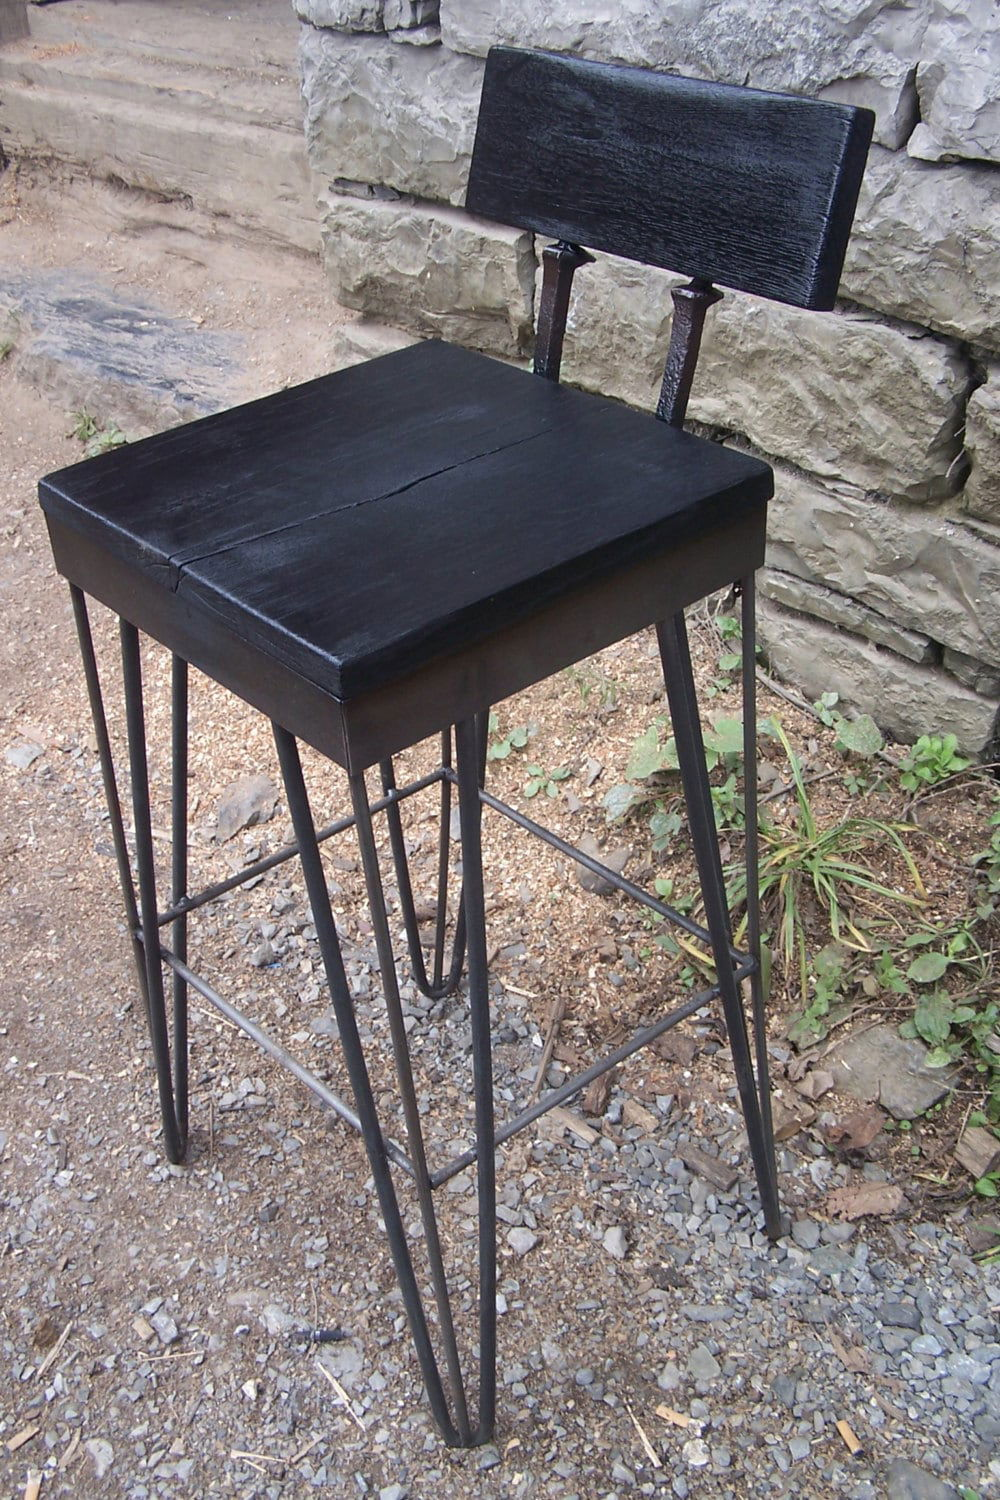 15x15 Black Counter Stool, 18-34in Height Dark Wood Barstool, Industrial Bar Height Stool, Railroad Spike Stool, Rustic Bar Stool With Back - Mac & Mabel